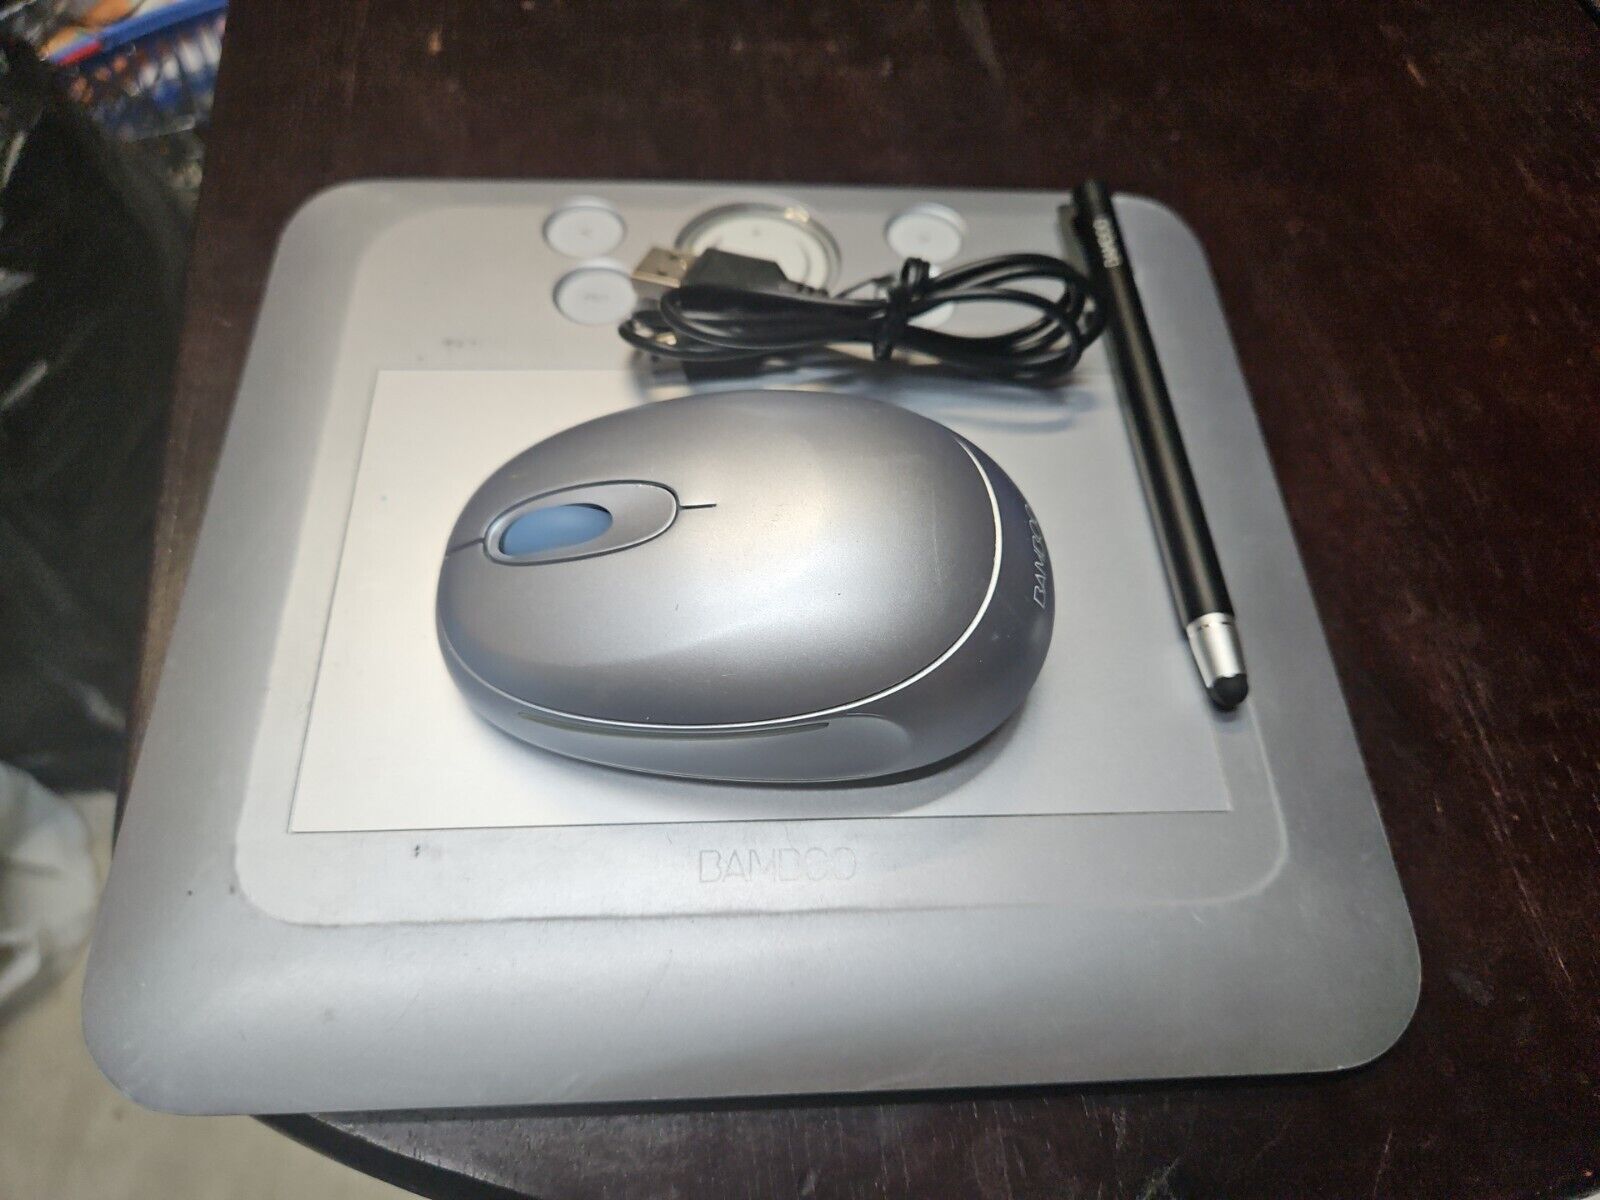 Wacom Small Bamboo Fun Tablet CTE-450 (complete with wire, pen and mouse)